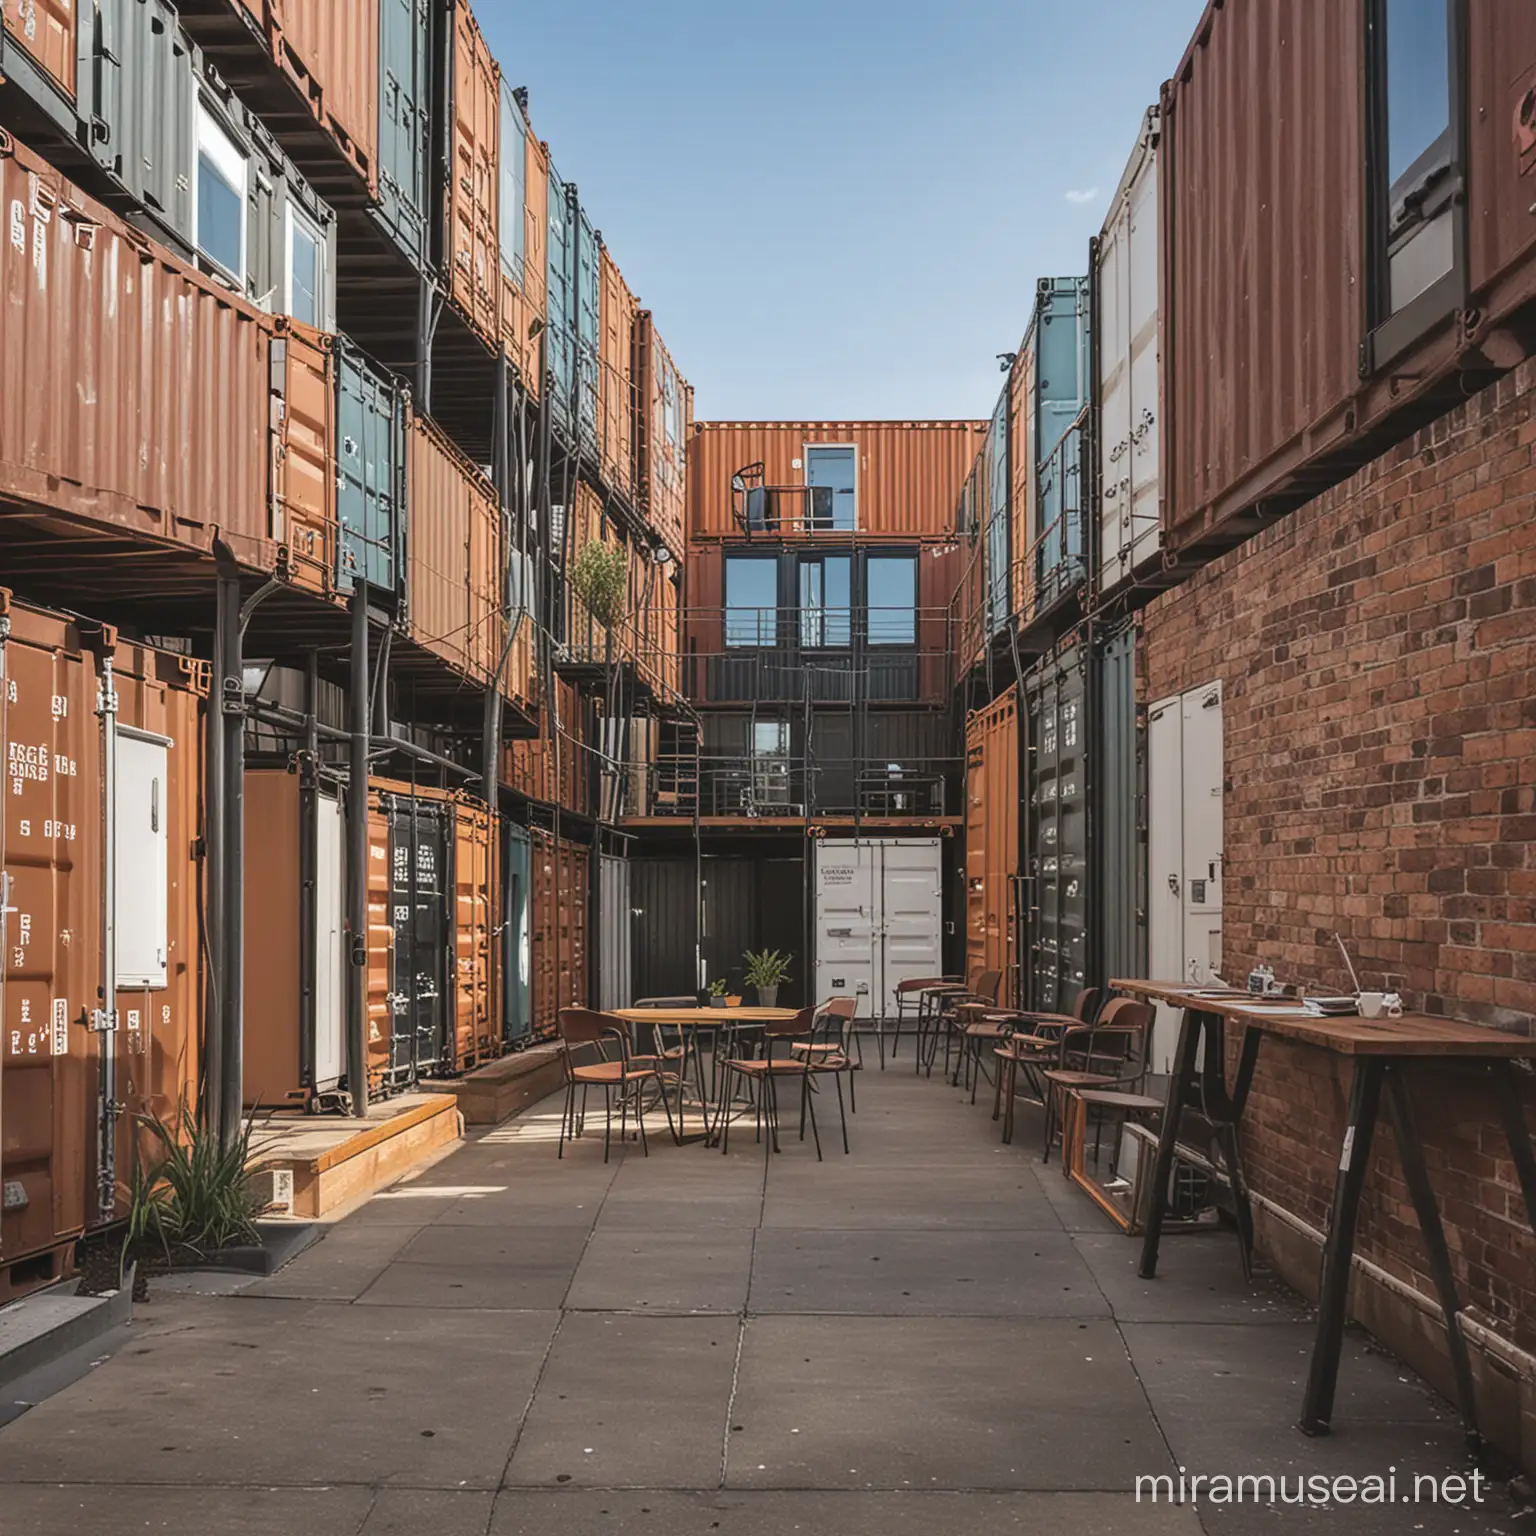 Shipping Container student village